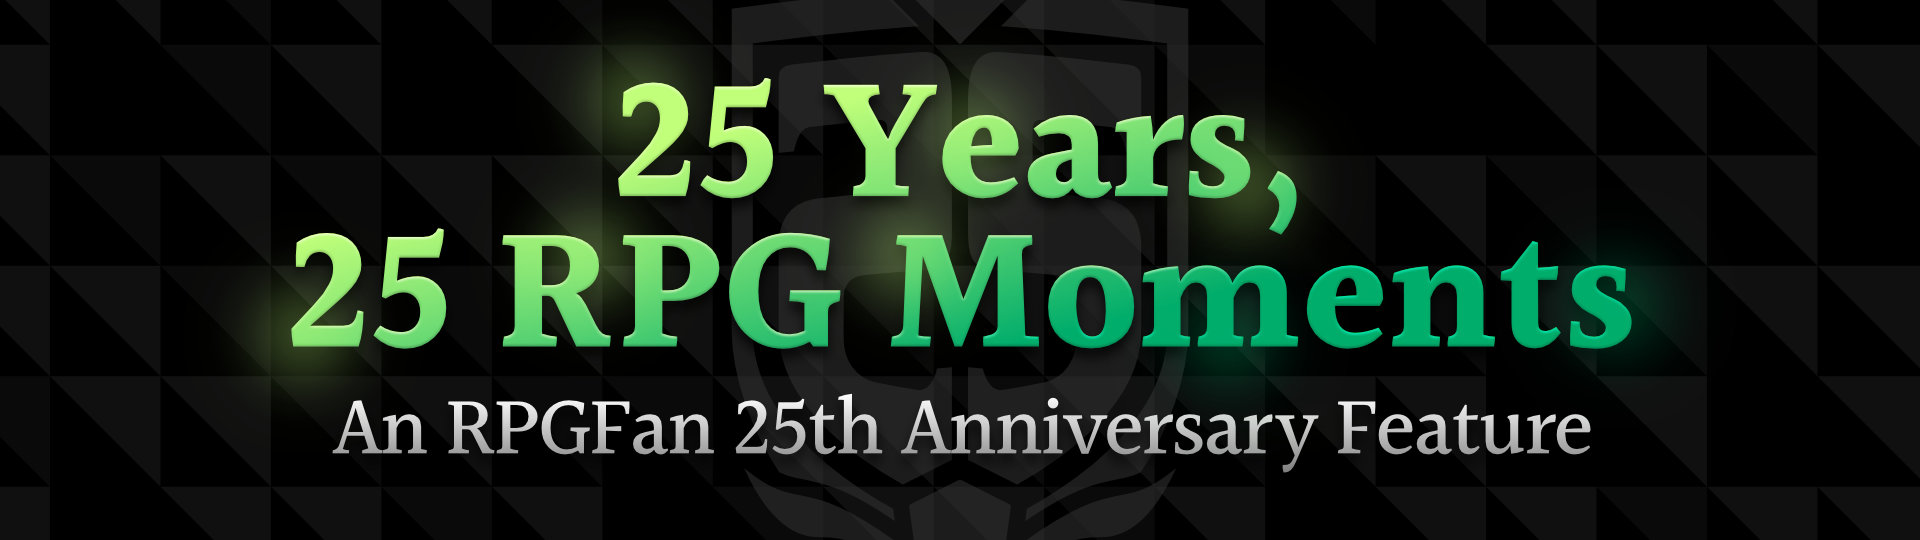 25 Years, 25 RPG Moments Featured